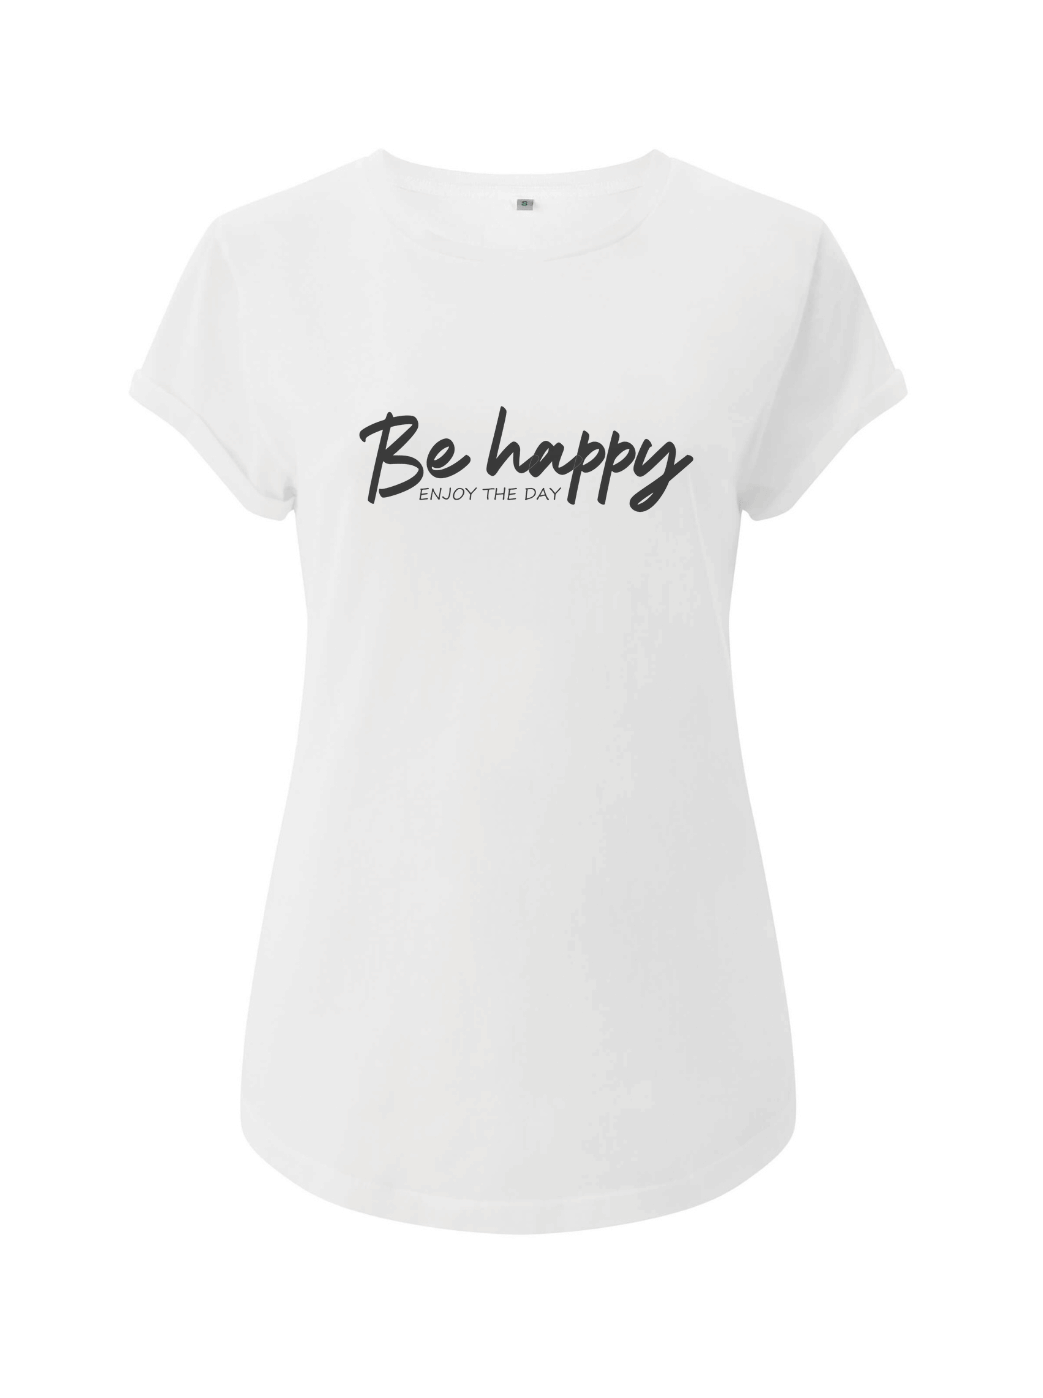 Damen T-Shirt rolled arms BE HAPPY weiß